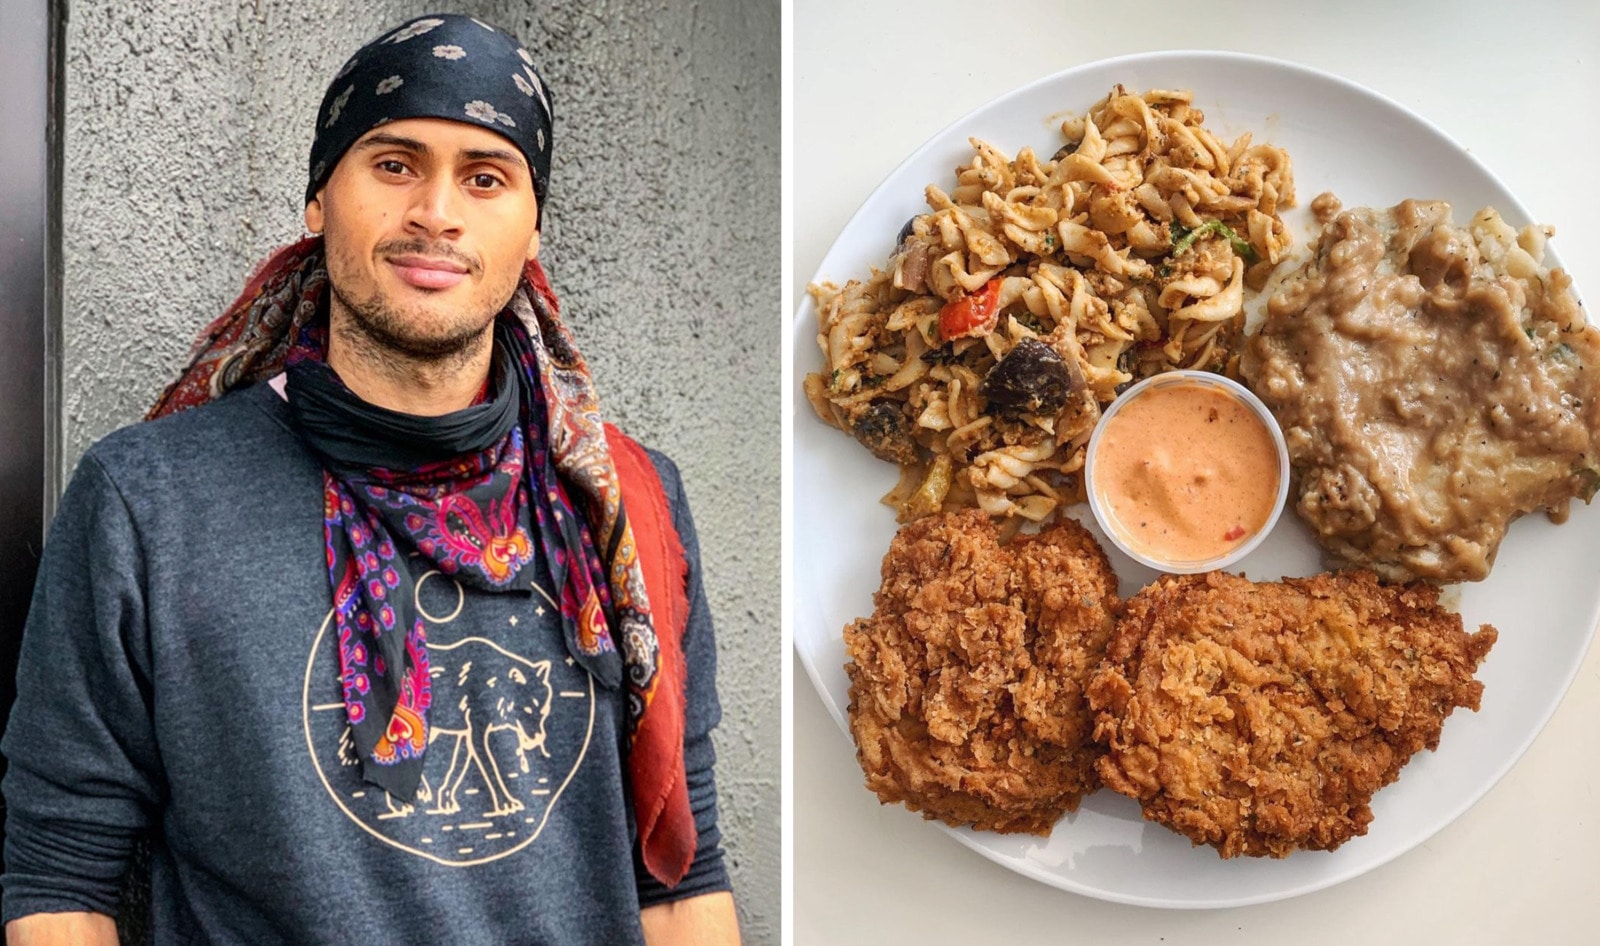 Their Food Was Outlawed in Mississippi. Now, They’re Serving Up Vegan Cajun-Creole in Portland.